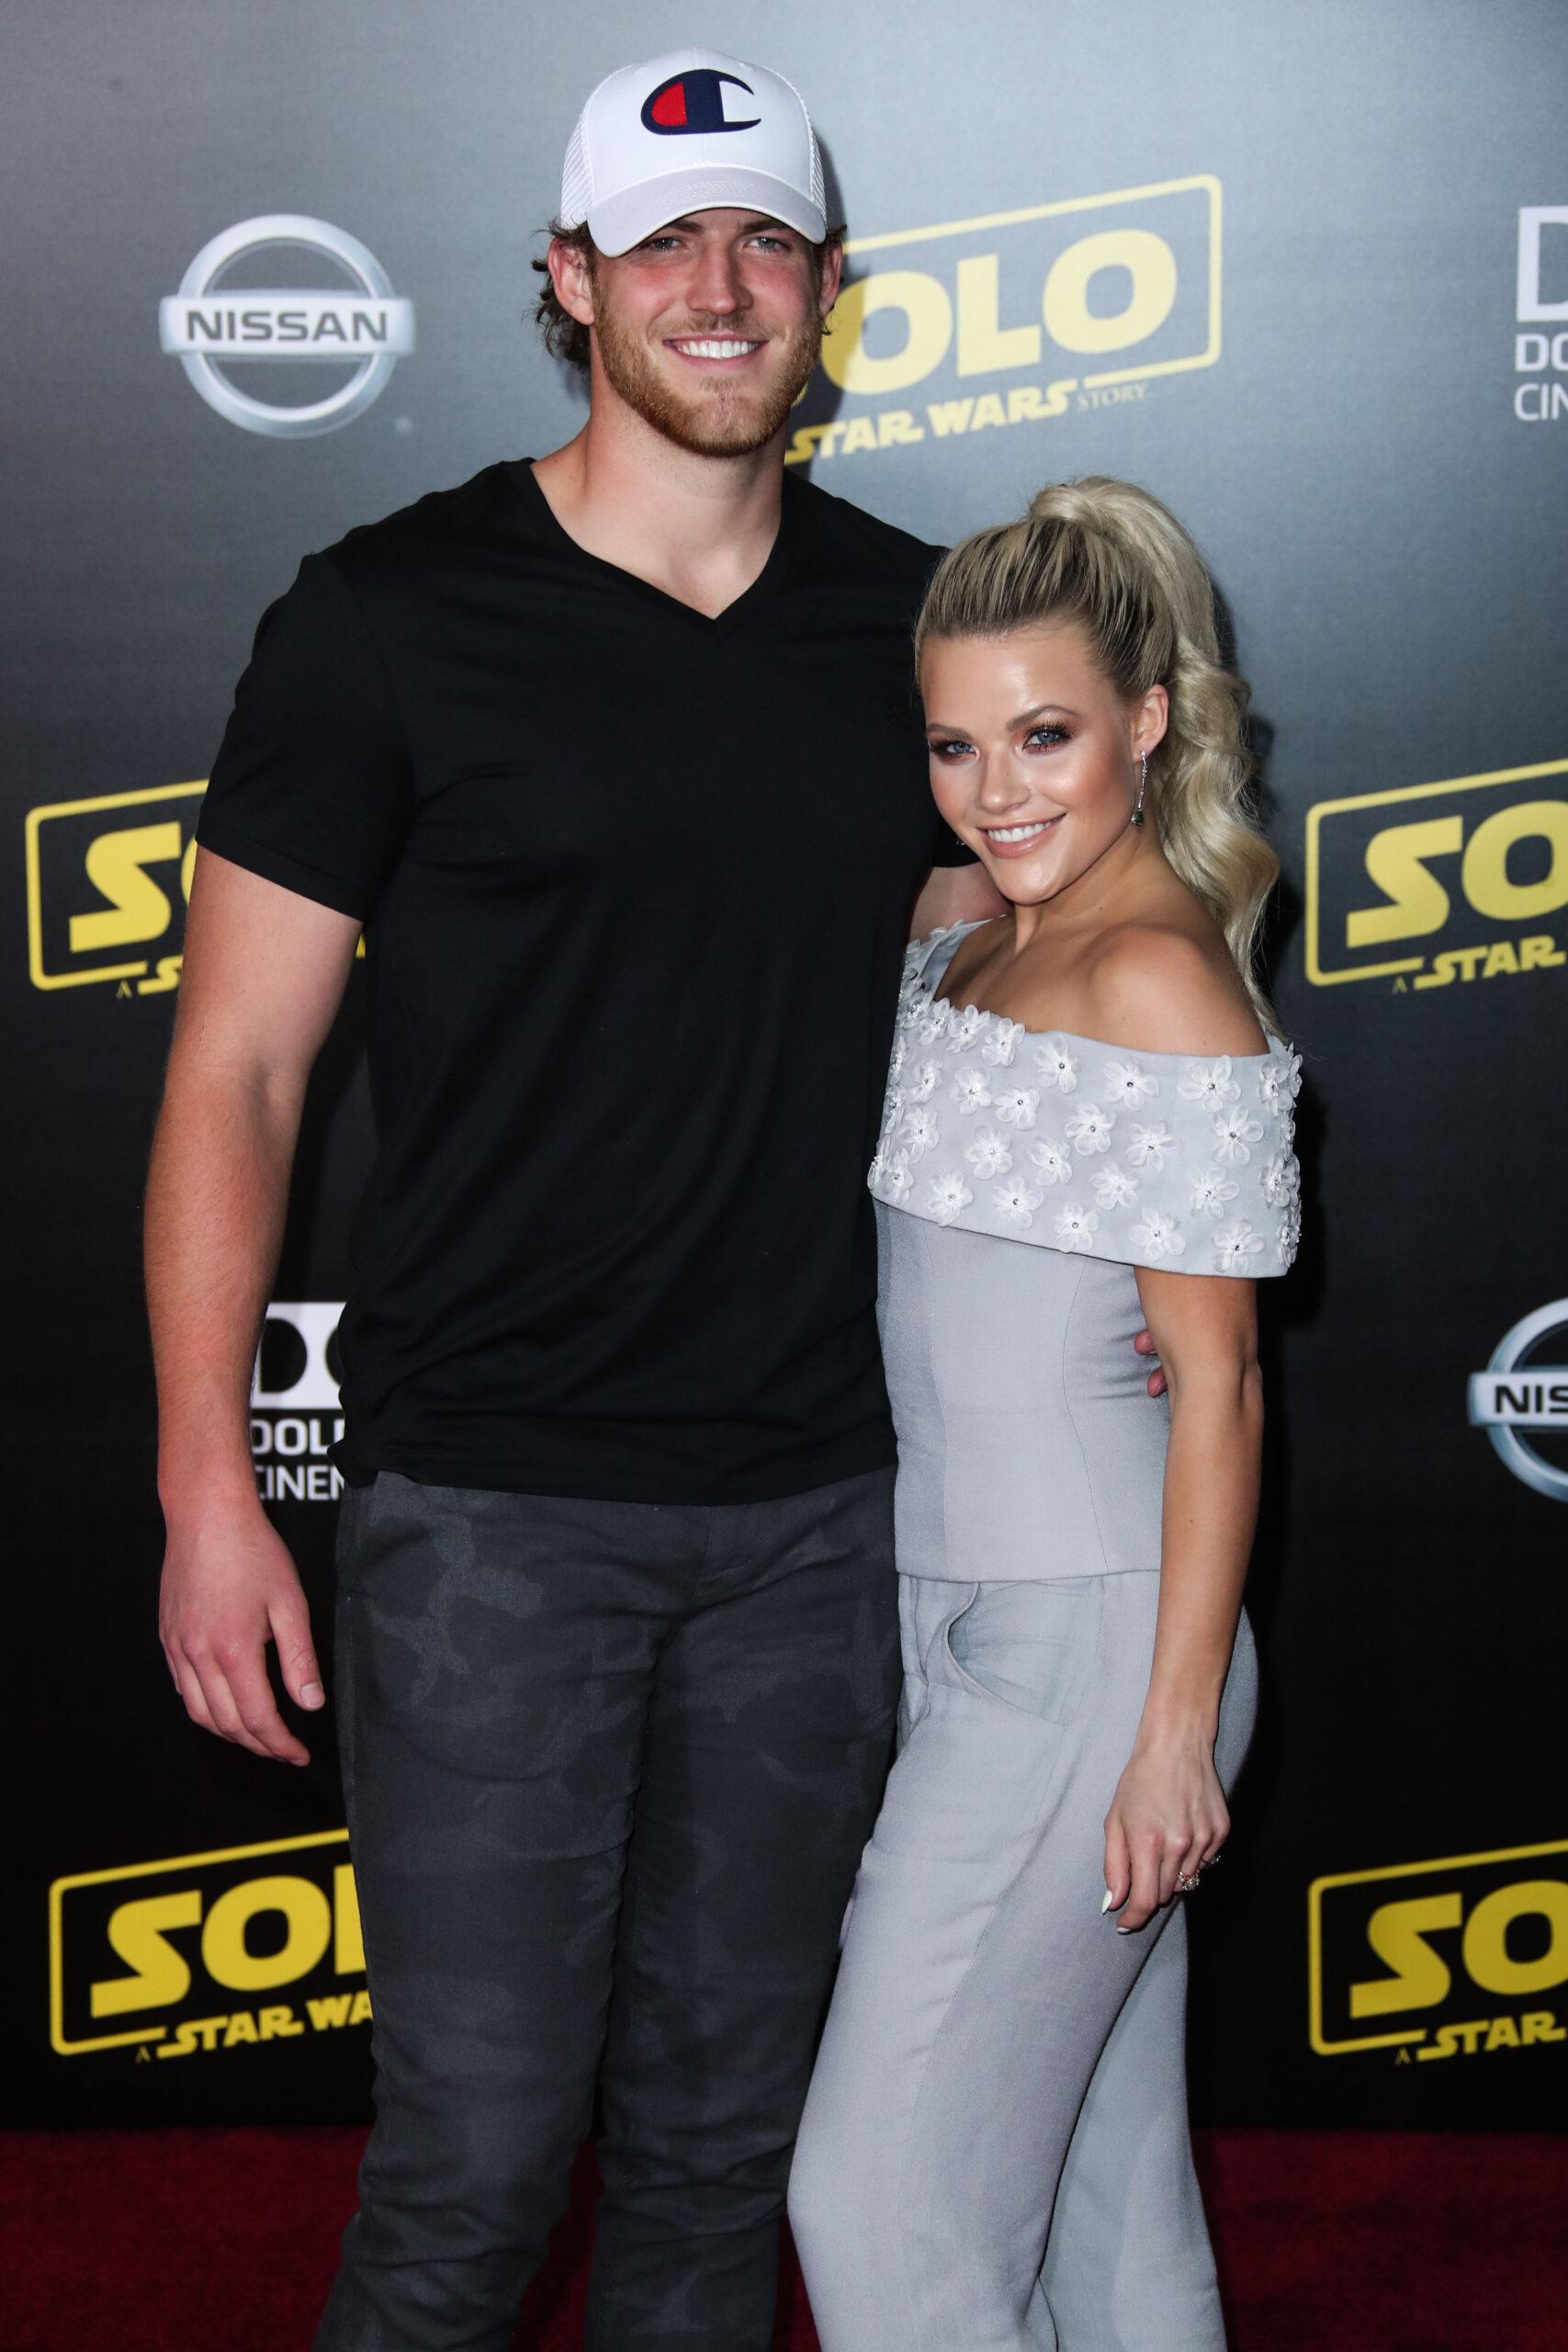 Witney Carson Los Angeles Premiere Of Disney Pictures And Lucasfilm's 'Solo: A Star Wars Story'